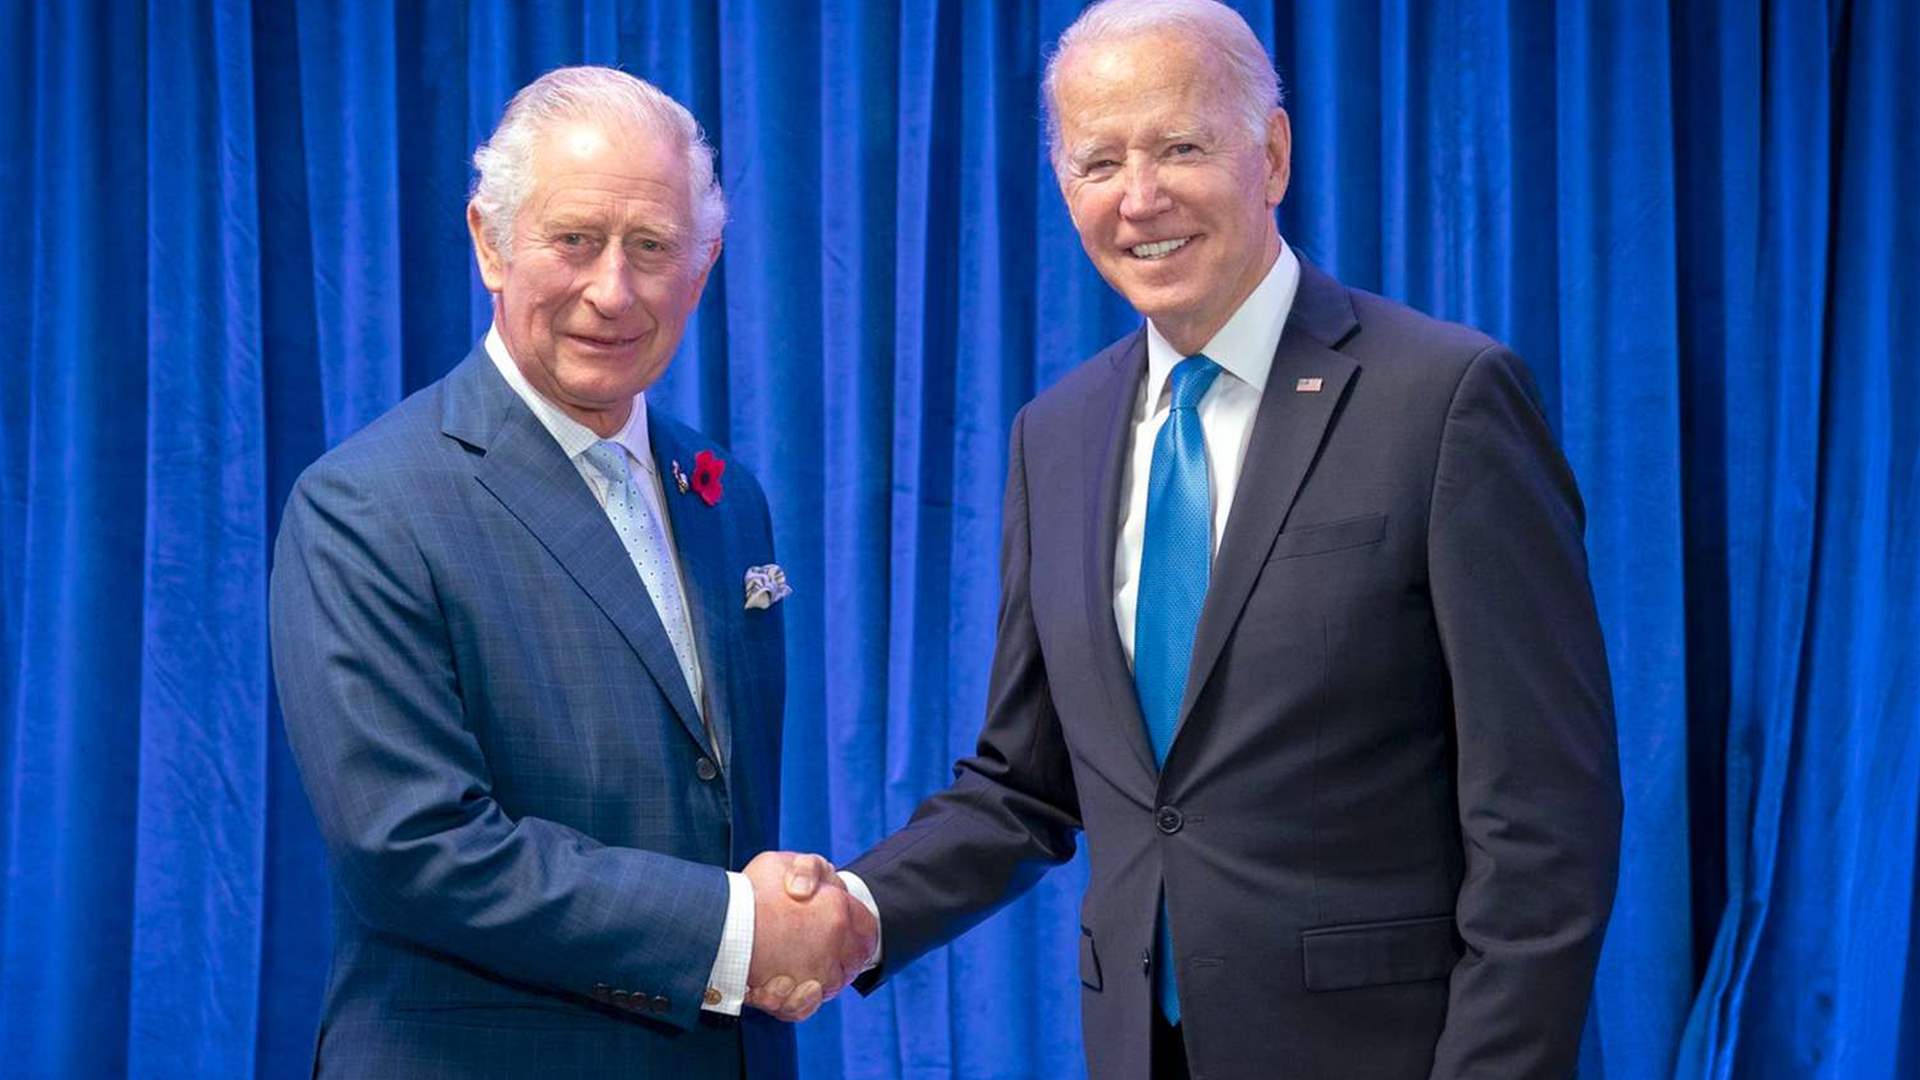 Biden makes a surprise visit to London on the eve of the North Atlantic alliance summit